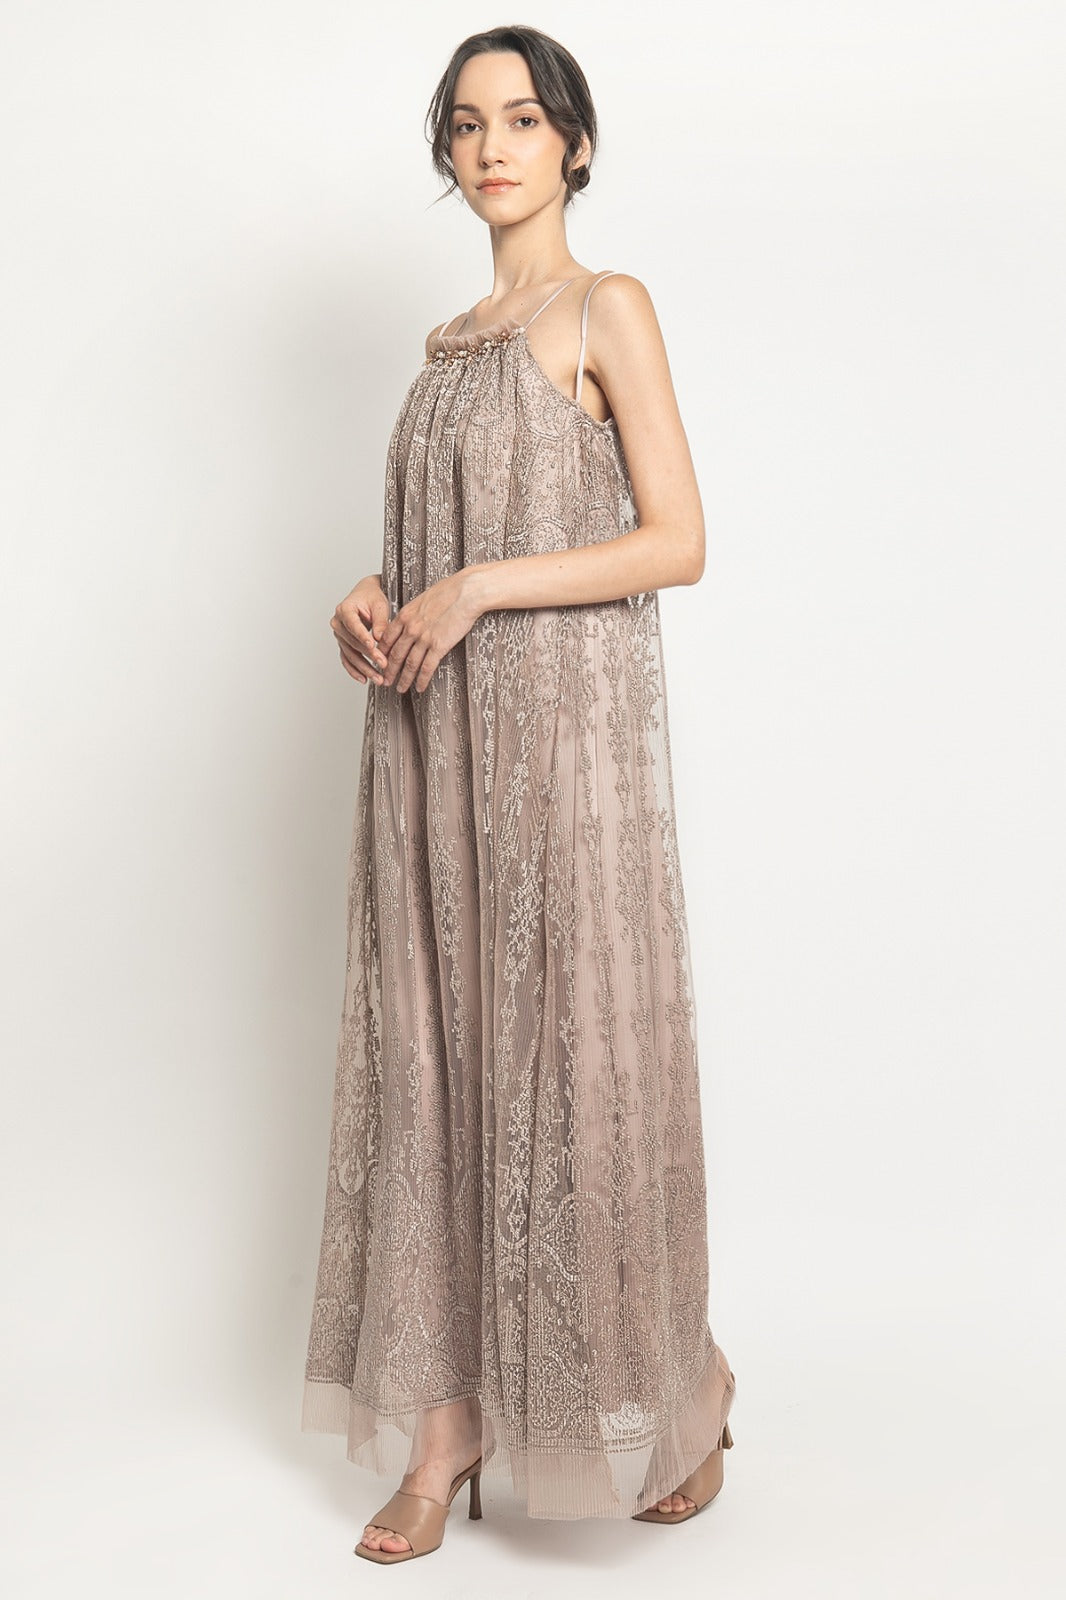 Venice Dress In Taupe (1 LEFT)